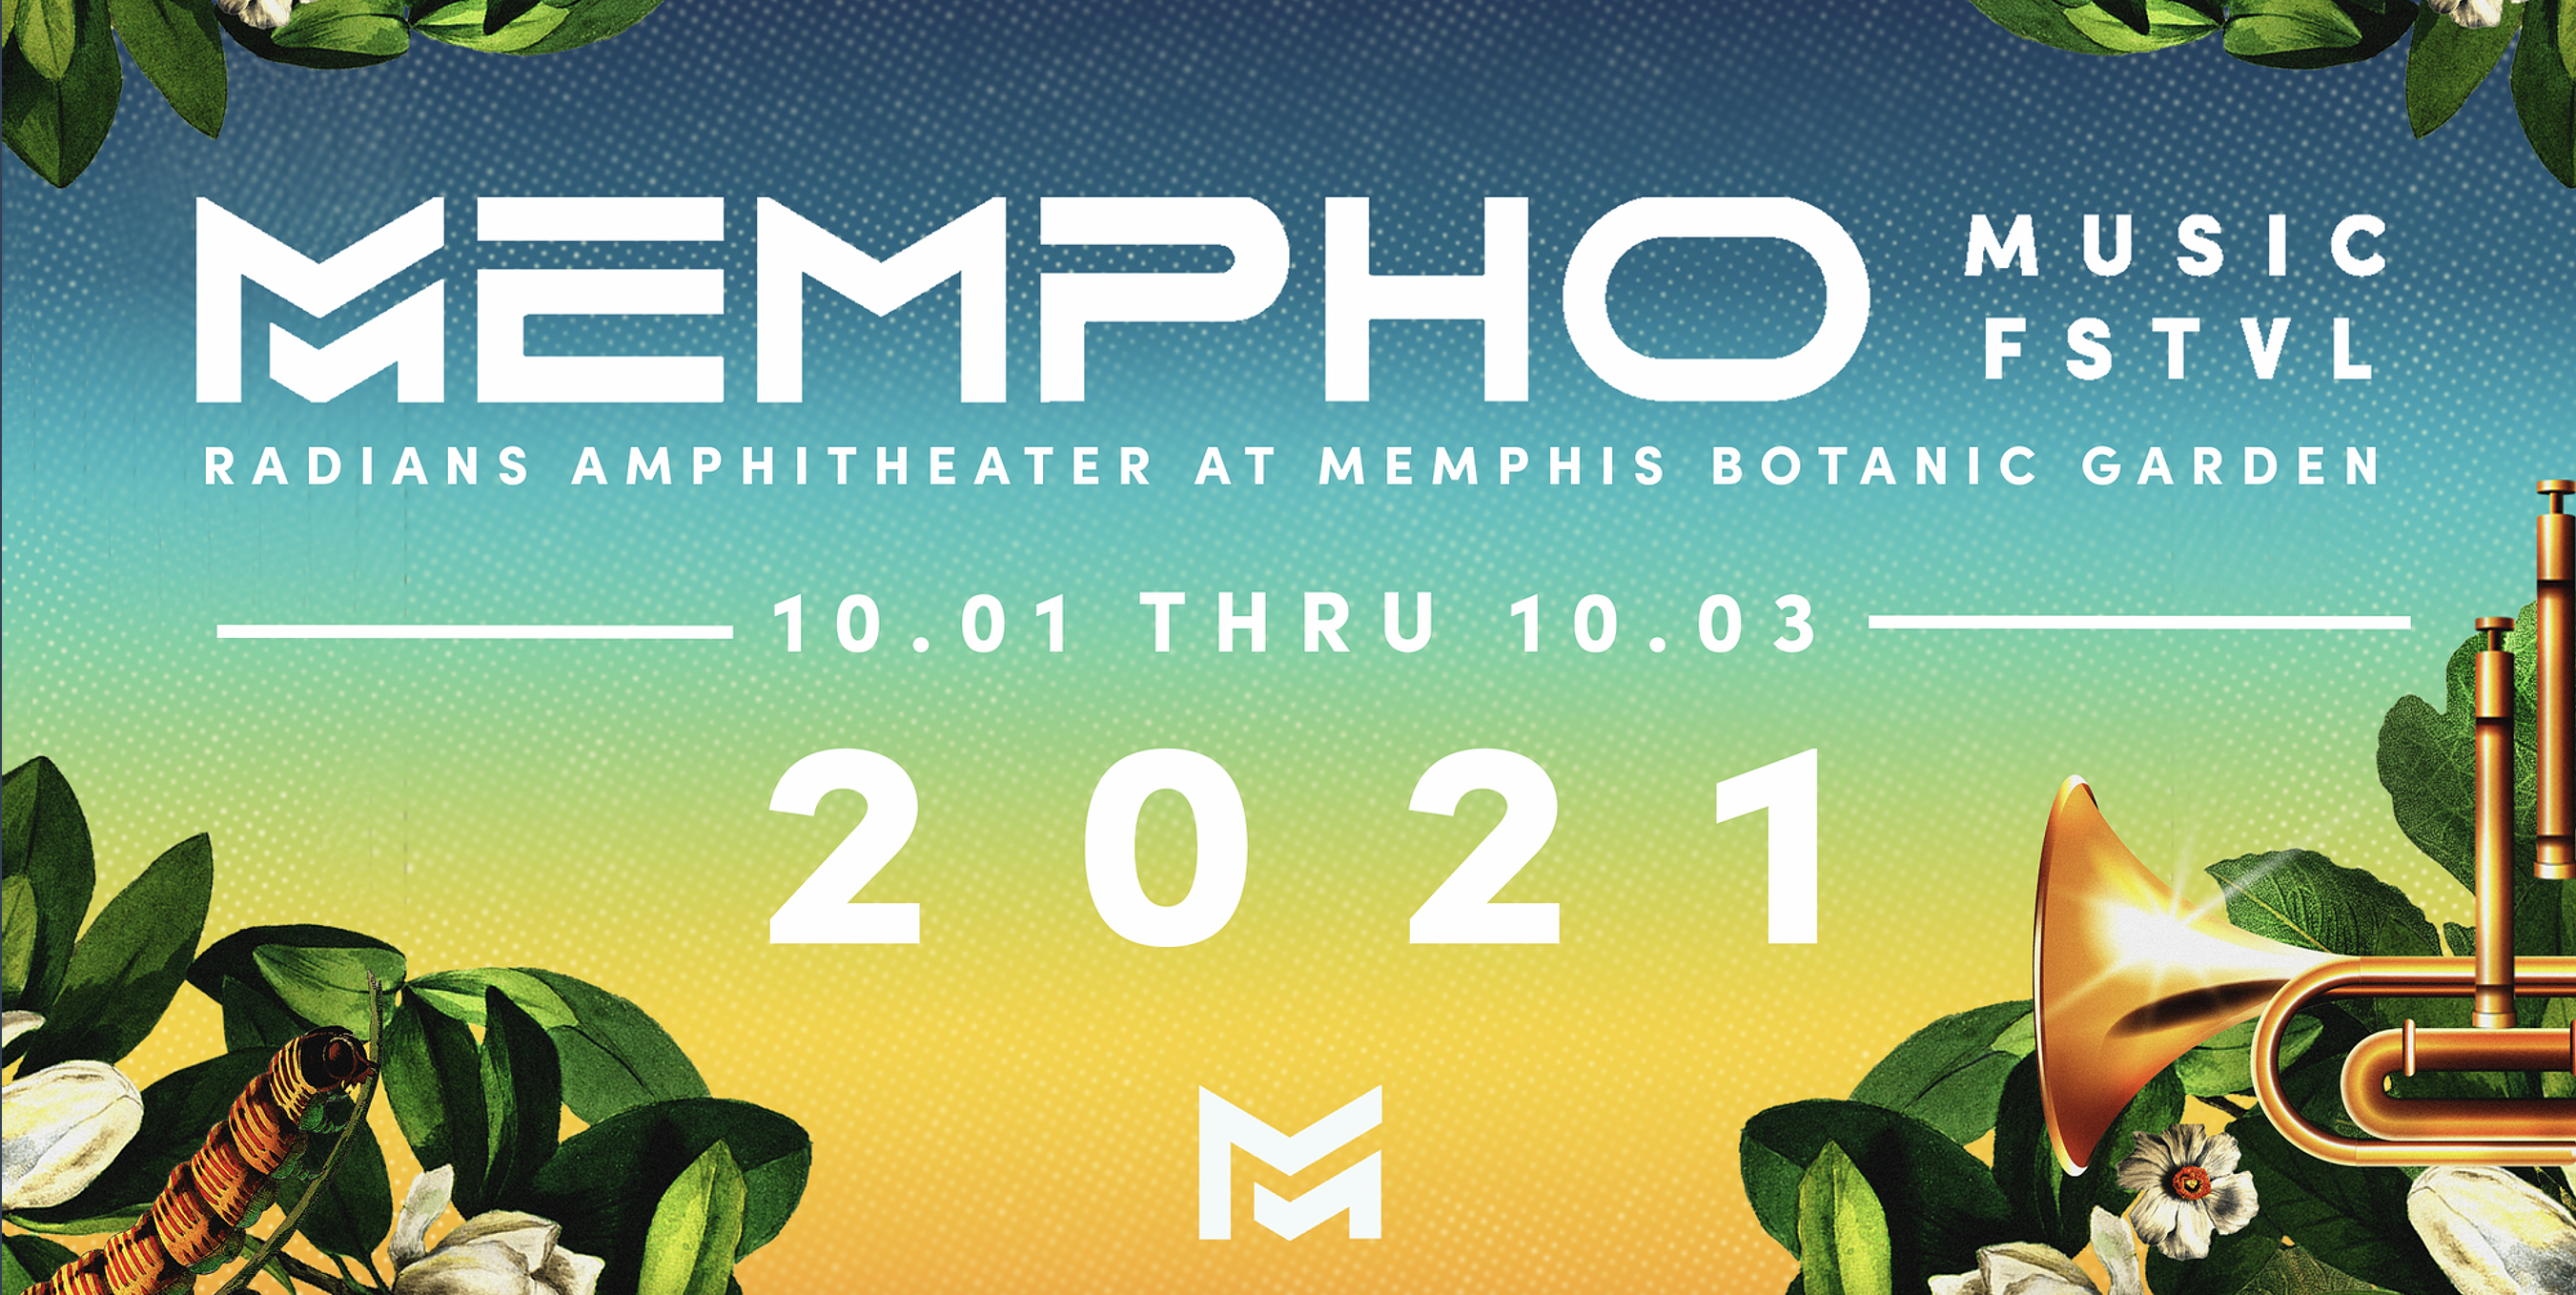 Mempho Music Festival Confirms Two Nights of Widespread Panic, Plus The Avett Brothers, Black Pumas and More